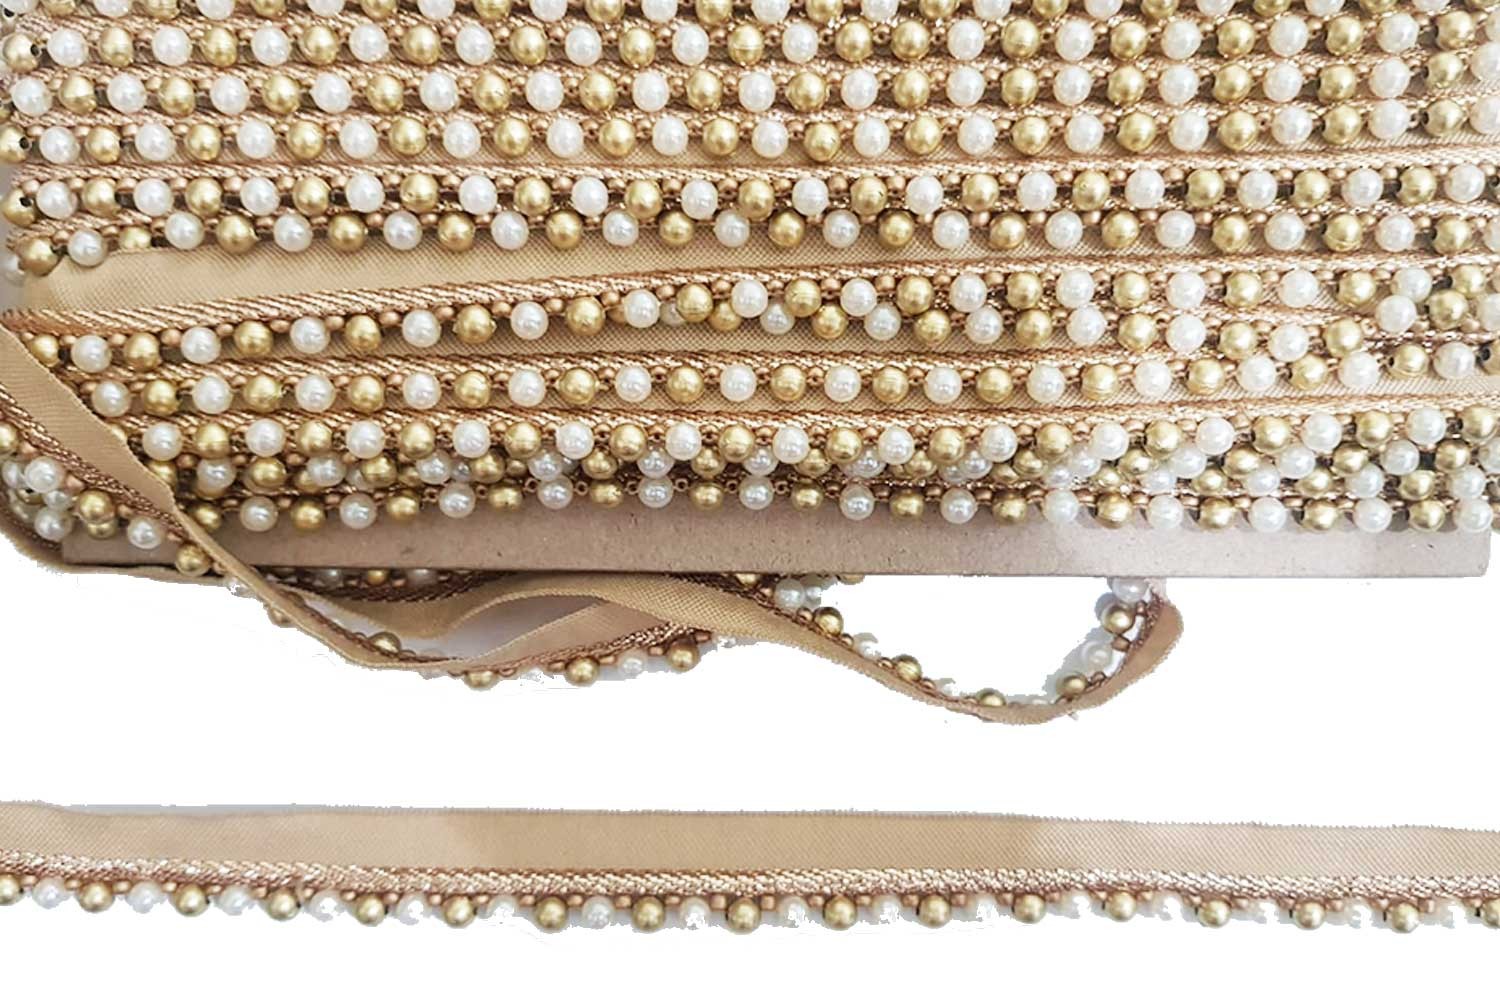 Golden and Off-White Beads With Rose Gold Piping Beaded Pearl Lace